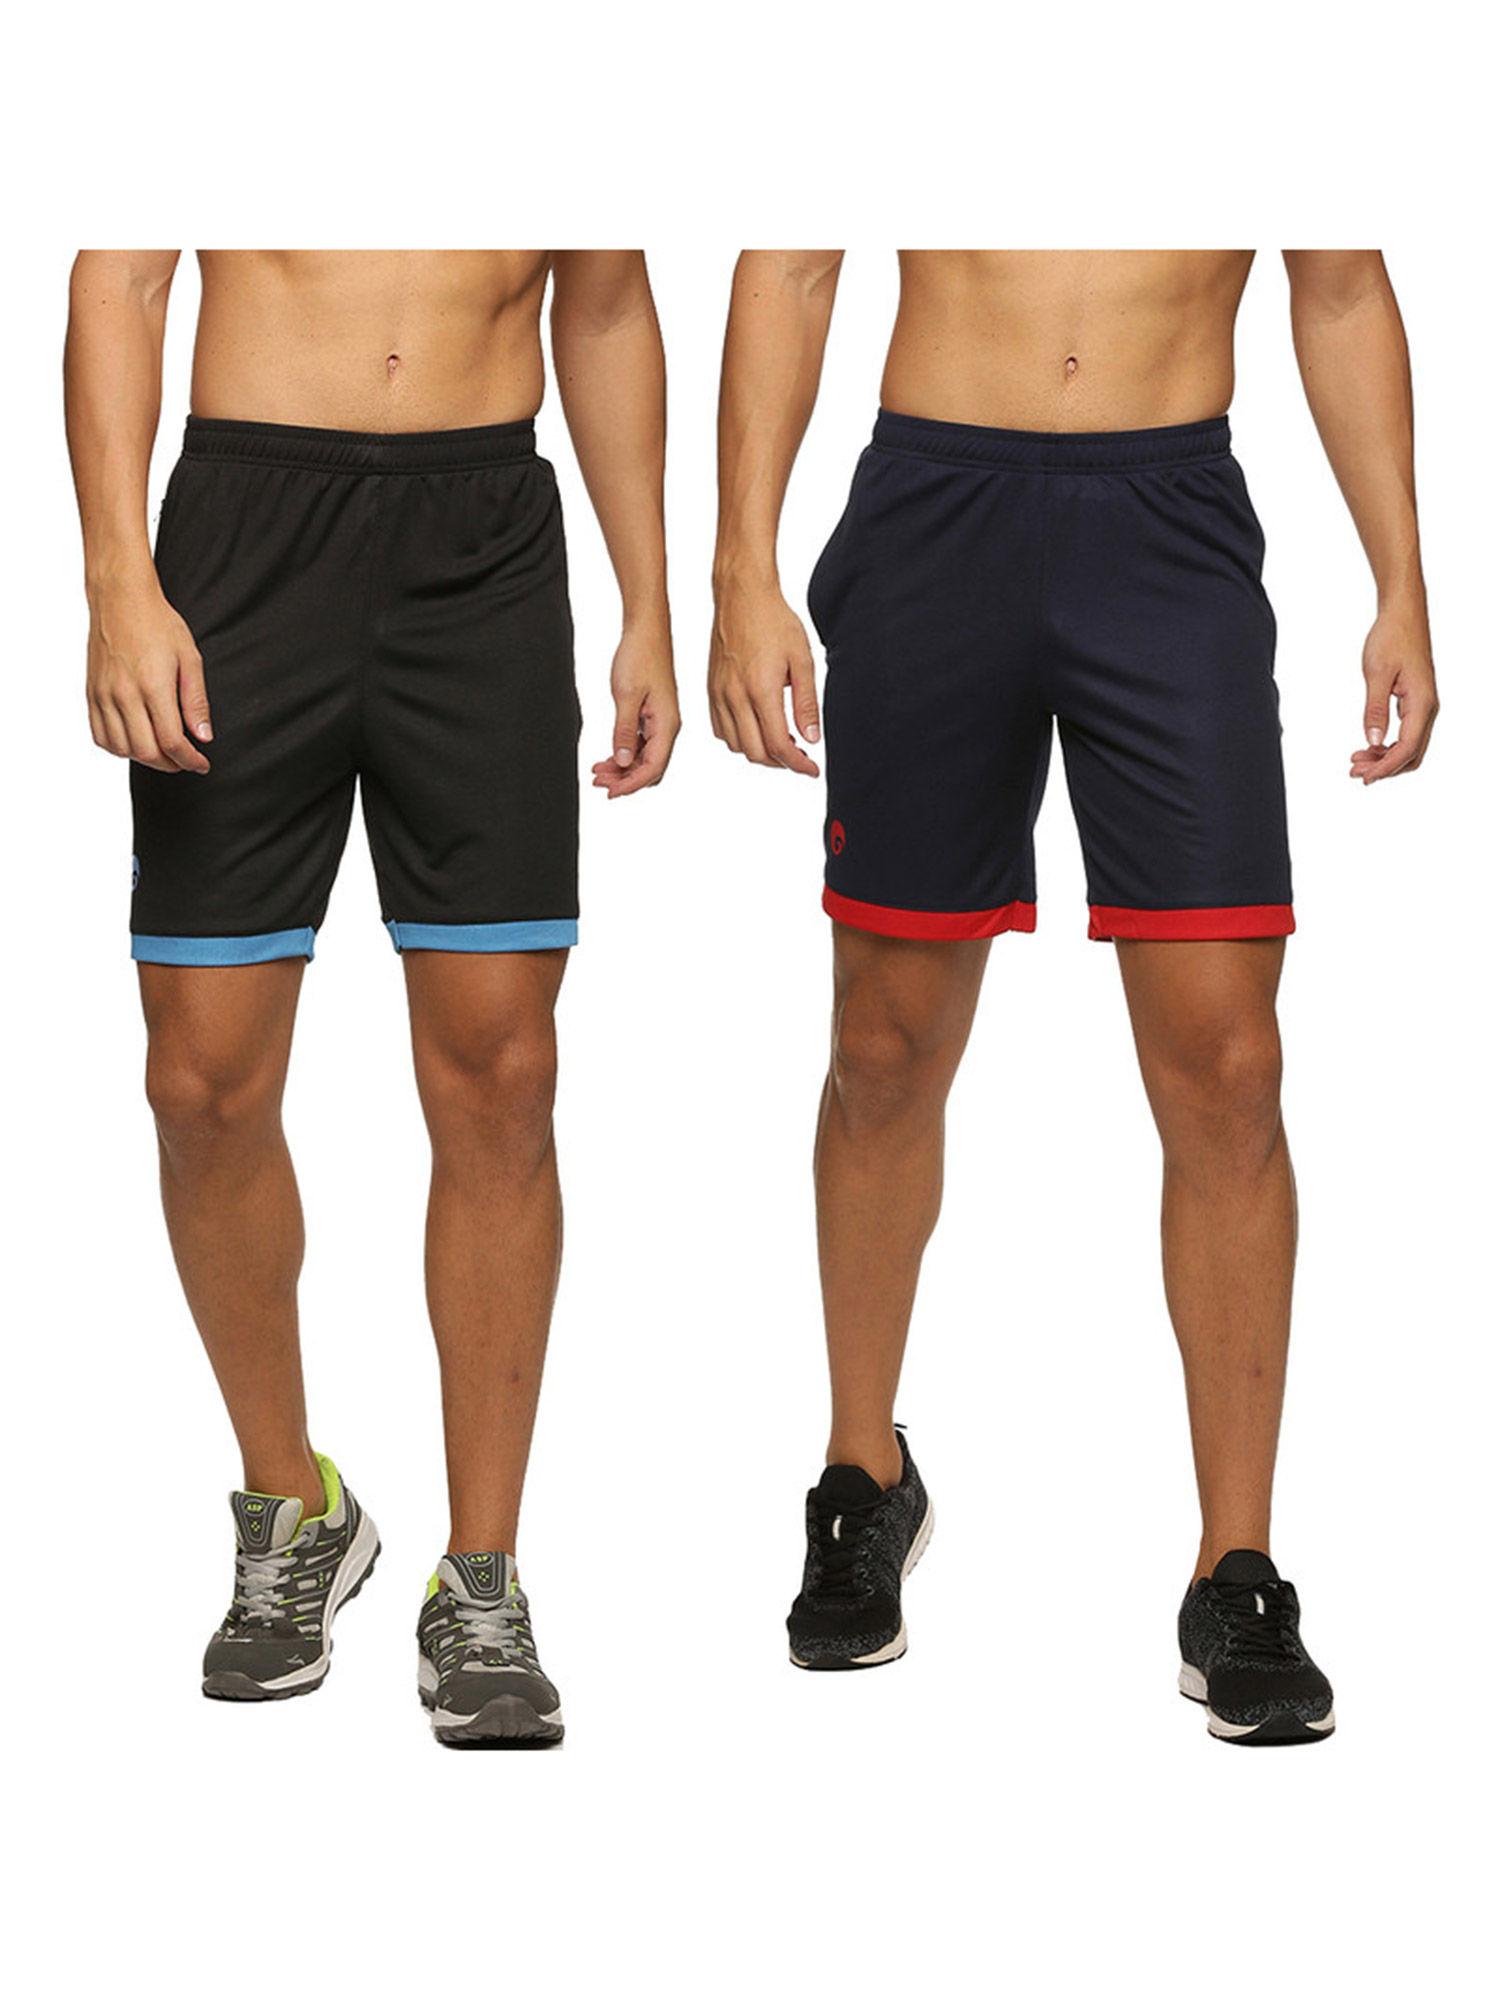 royal casual sports shorts for men black-navy (pack of 2)